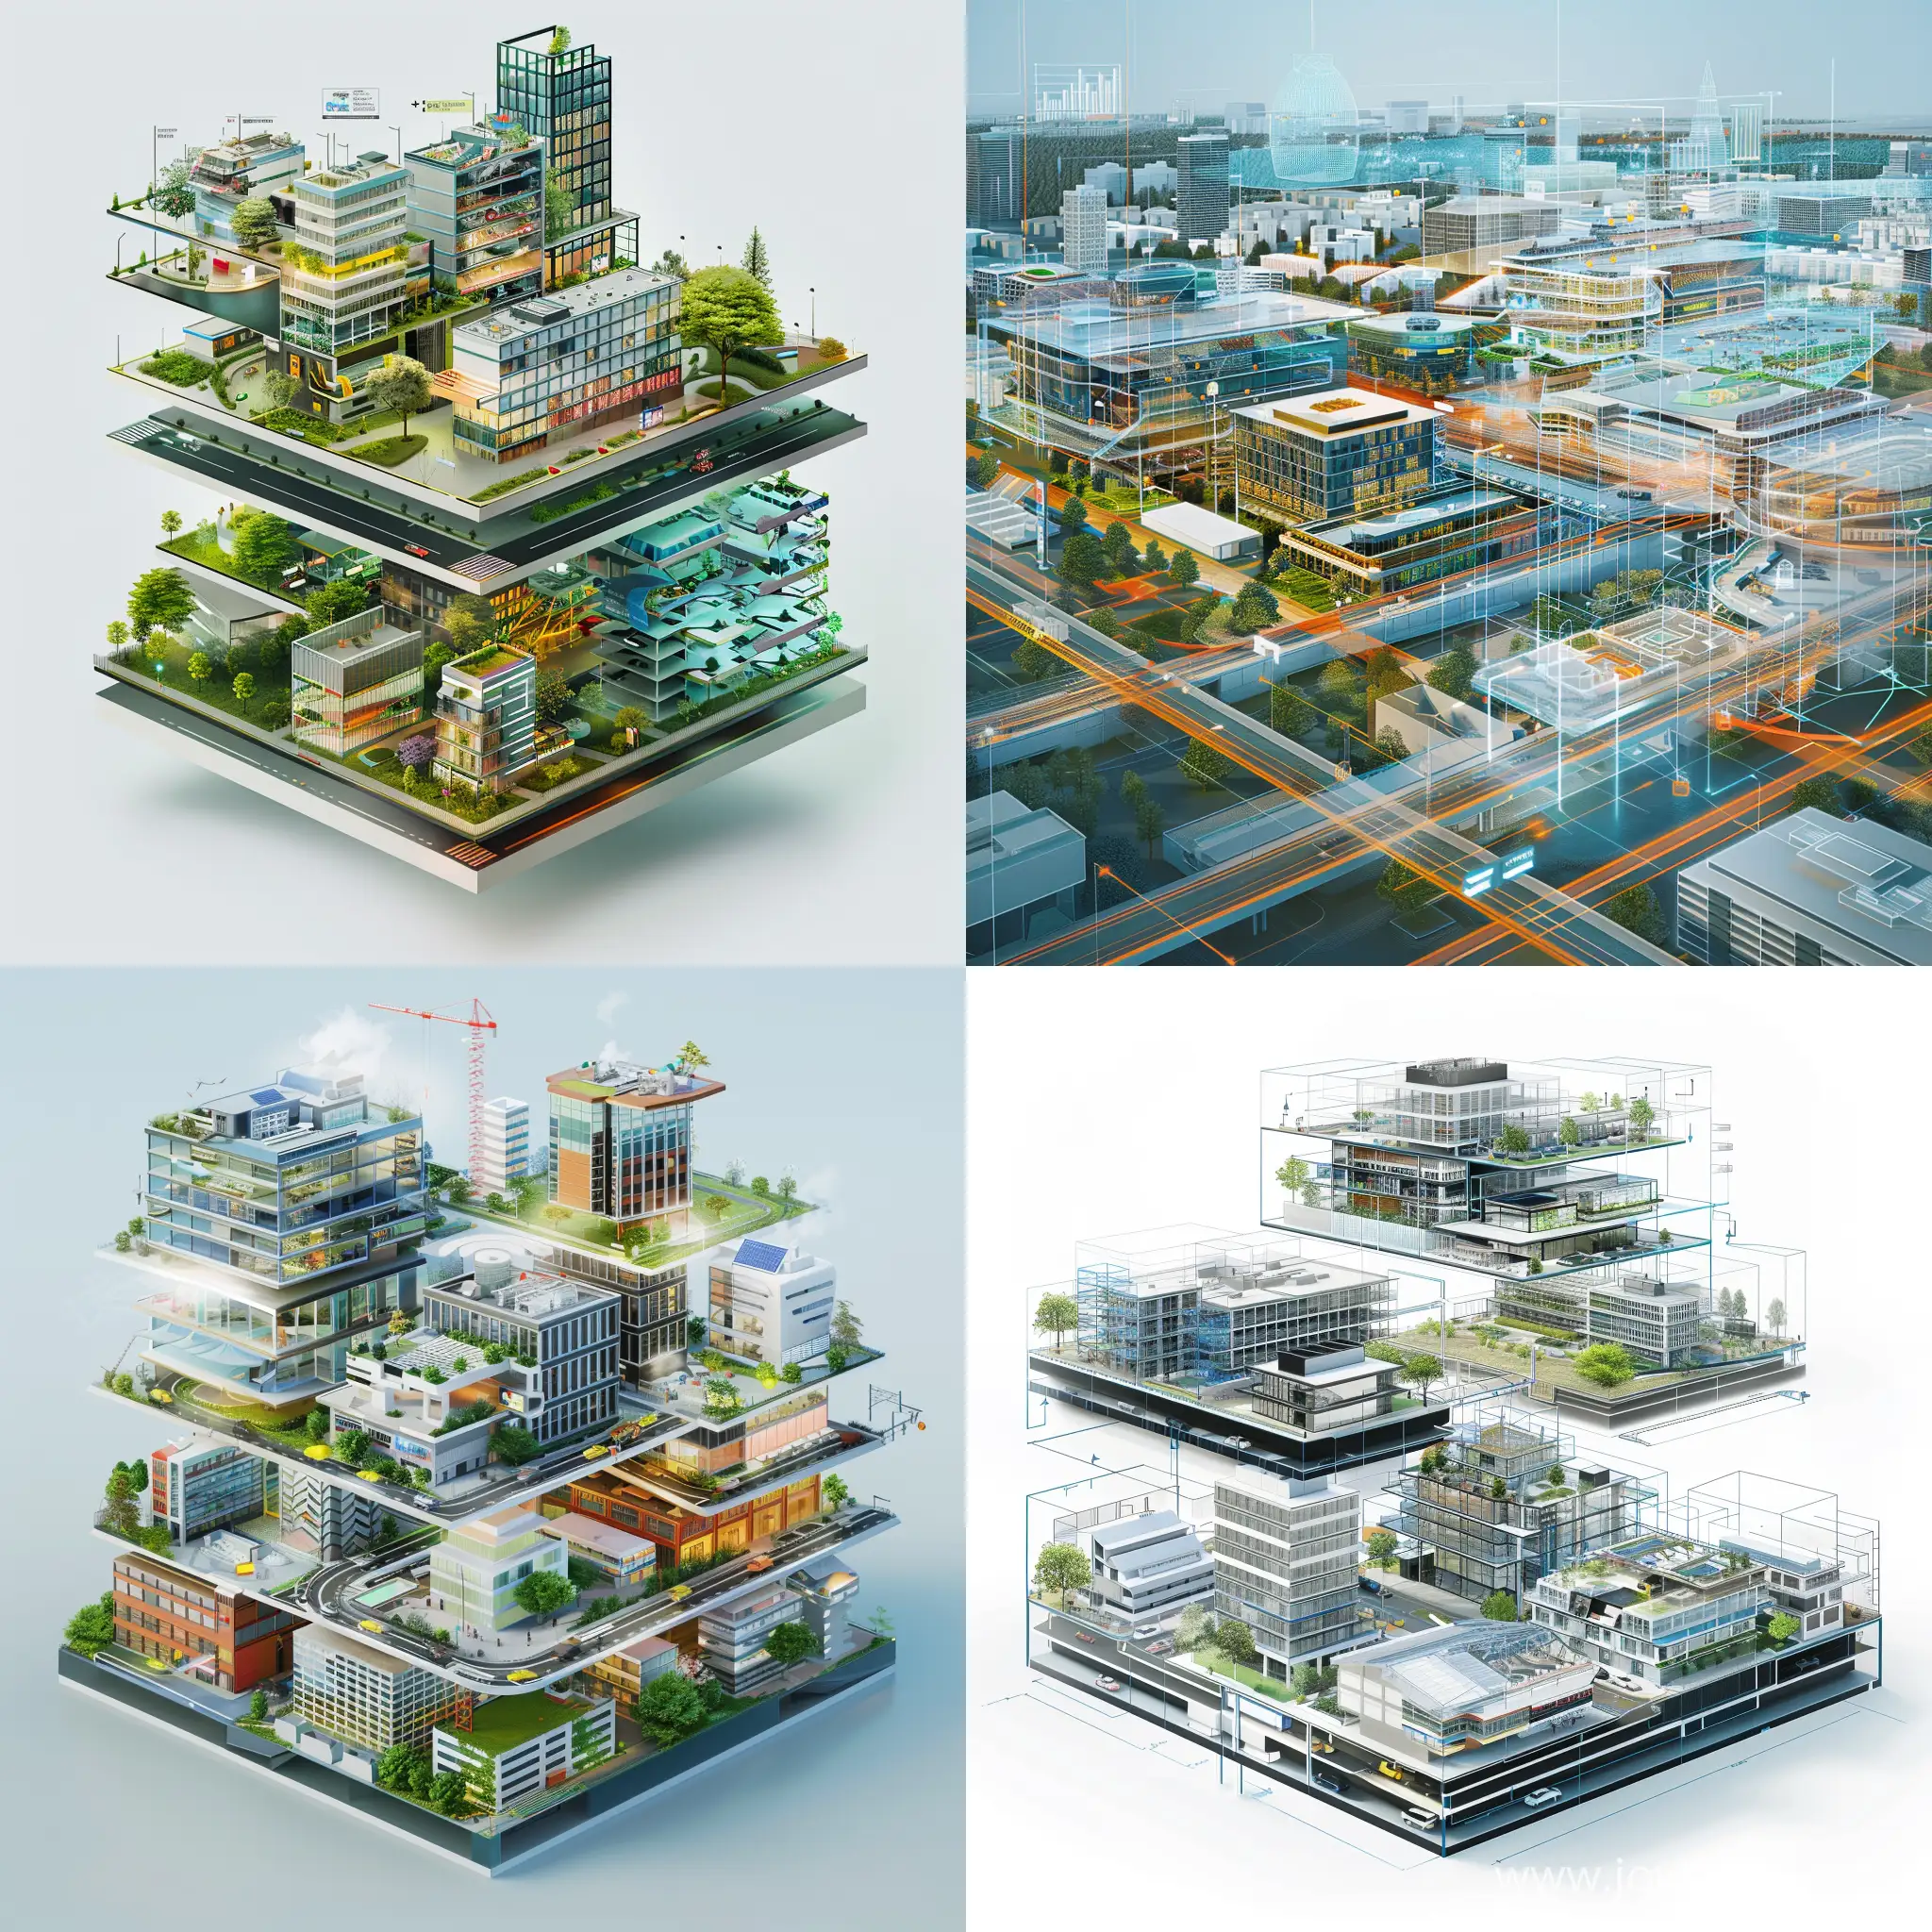 The digital twin of a modern city with several layers like buildings, infrastructure, transport, communications etc. 